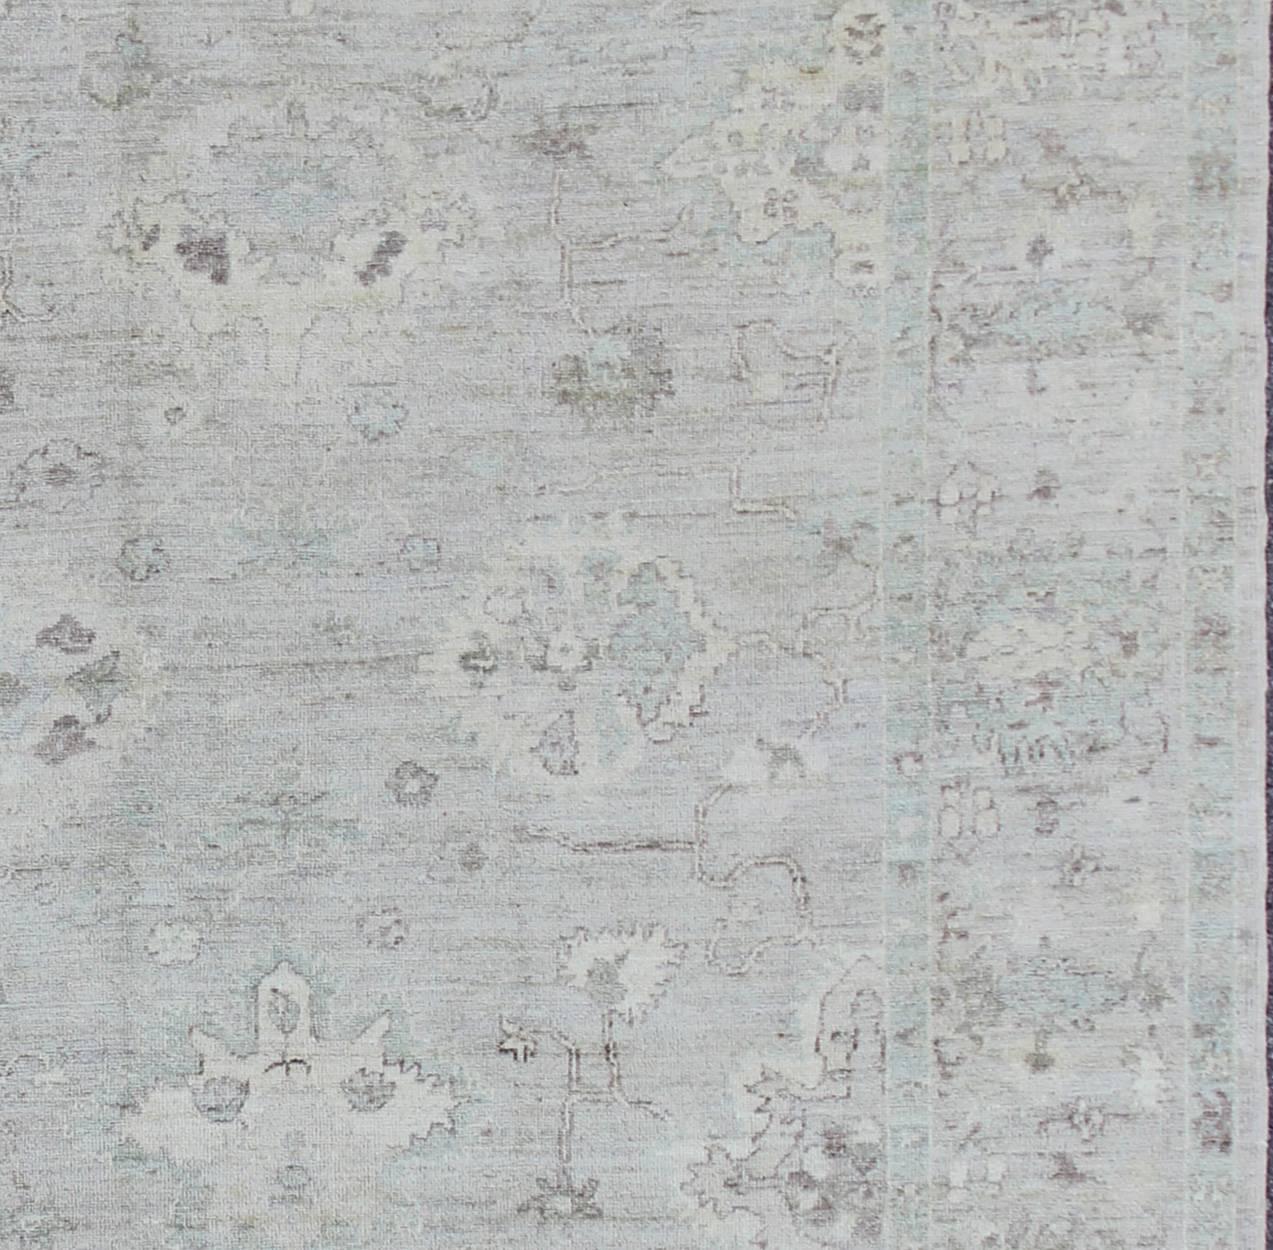 Made with a combination of angora and old wool, this magnificent Oushak boasts an all-over design in a large-scale style. The plentiful floral and bouquet motifs create an open design which is surrounded by a border containing defined and geometric